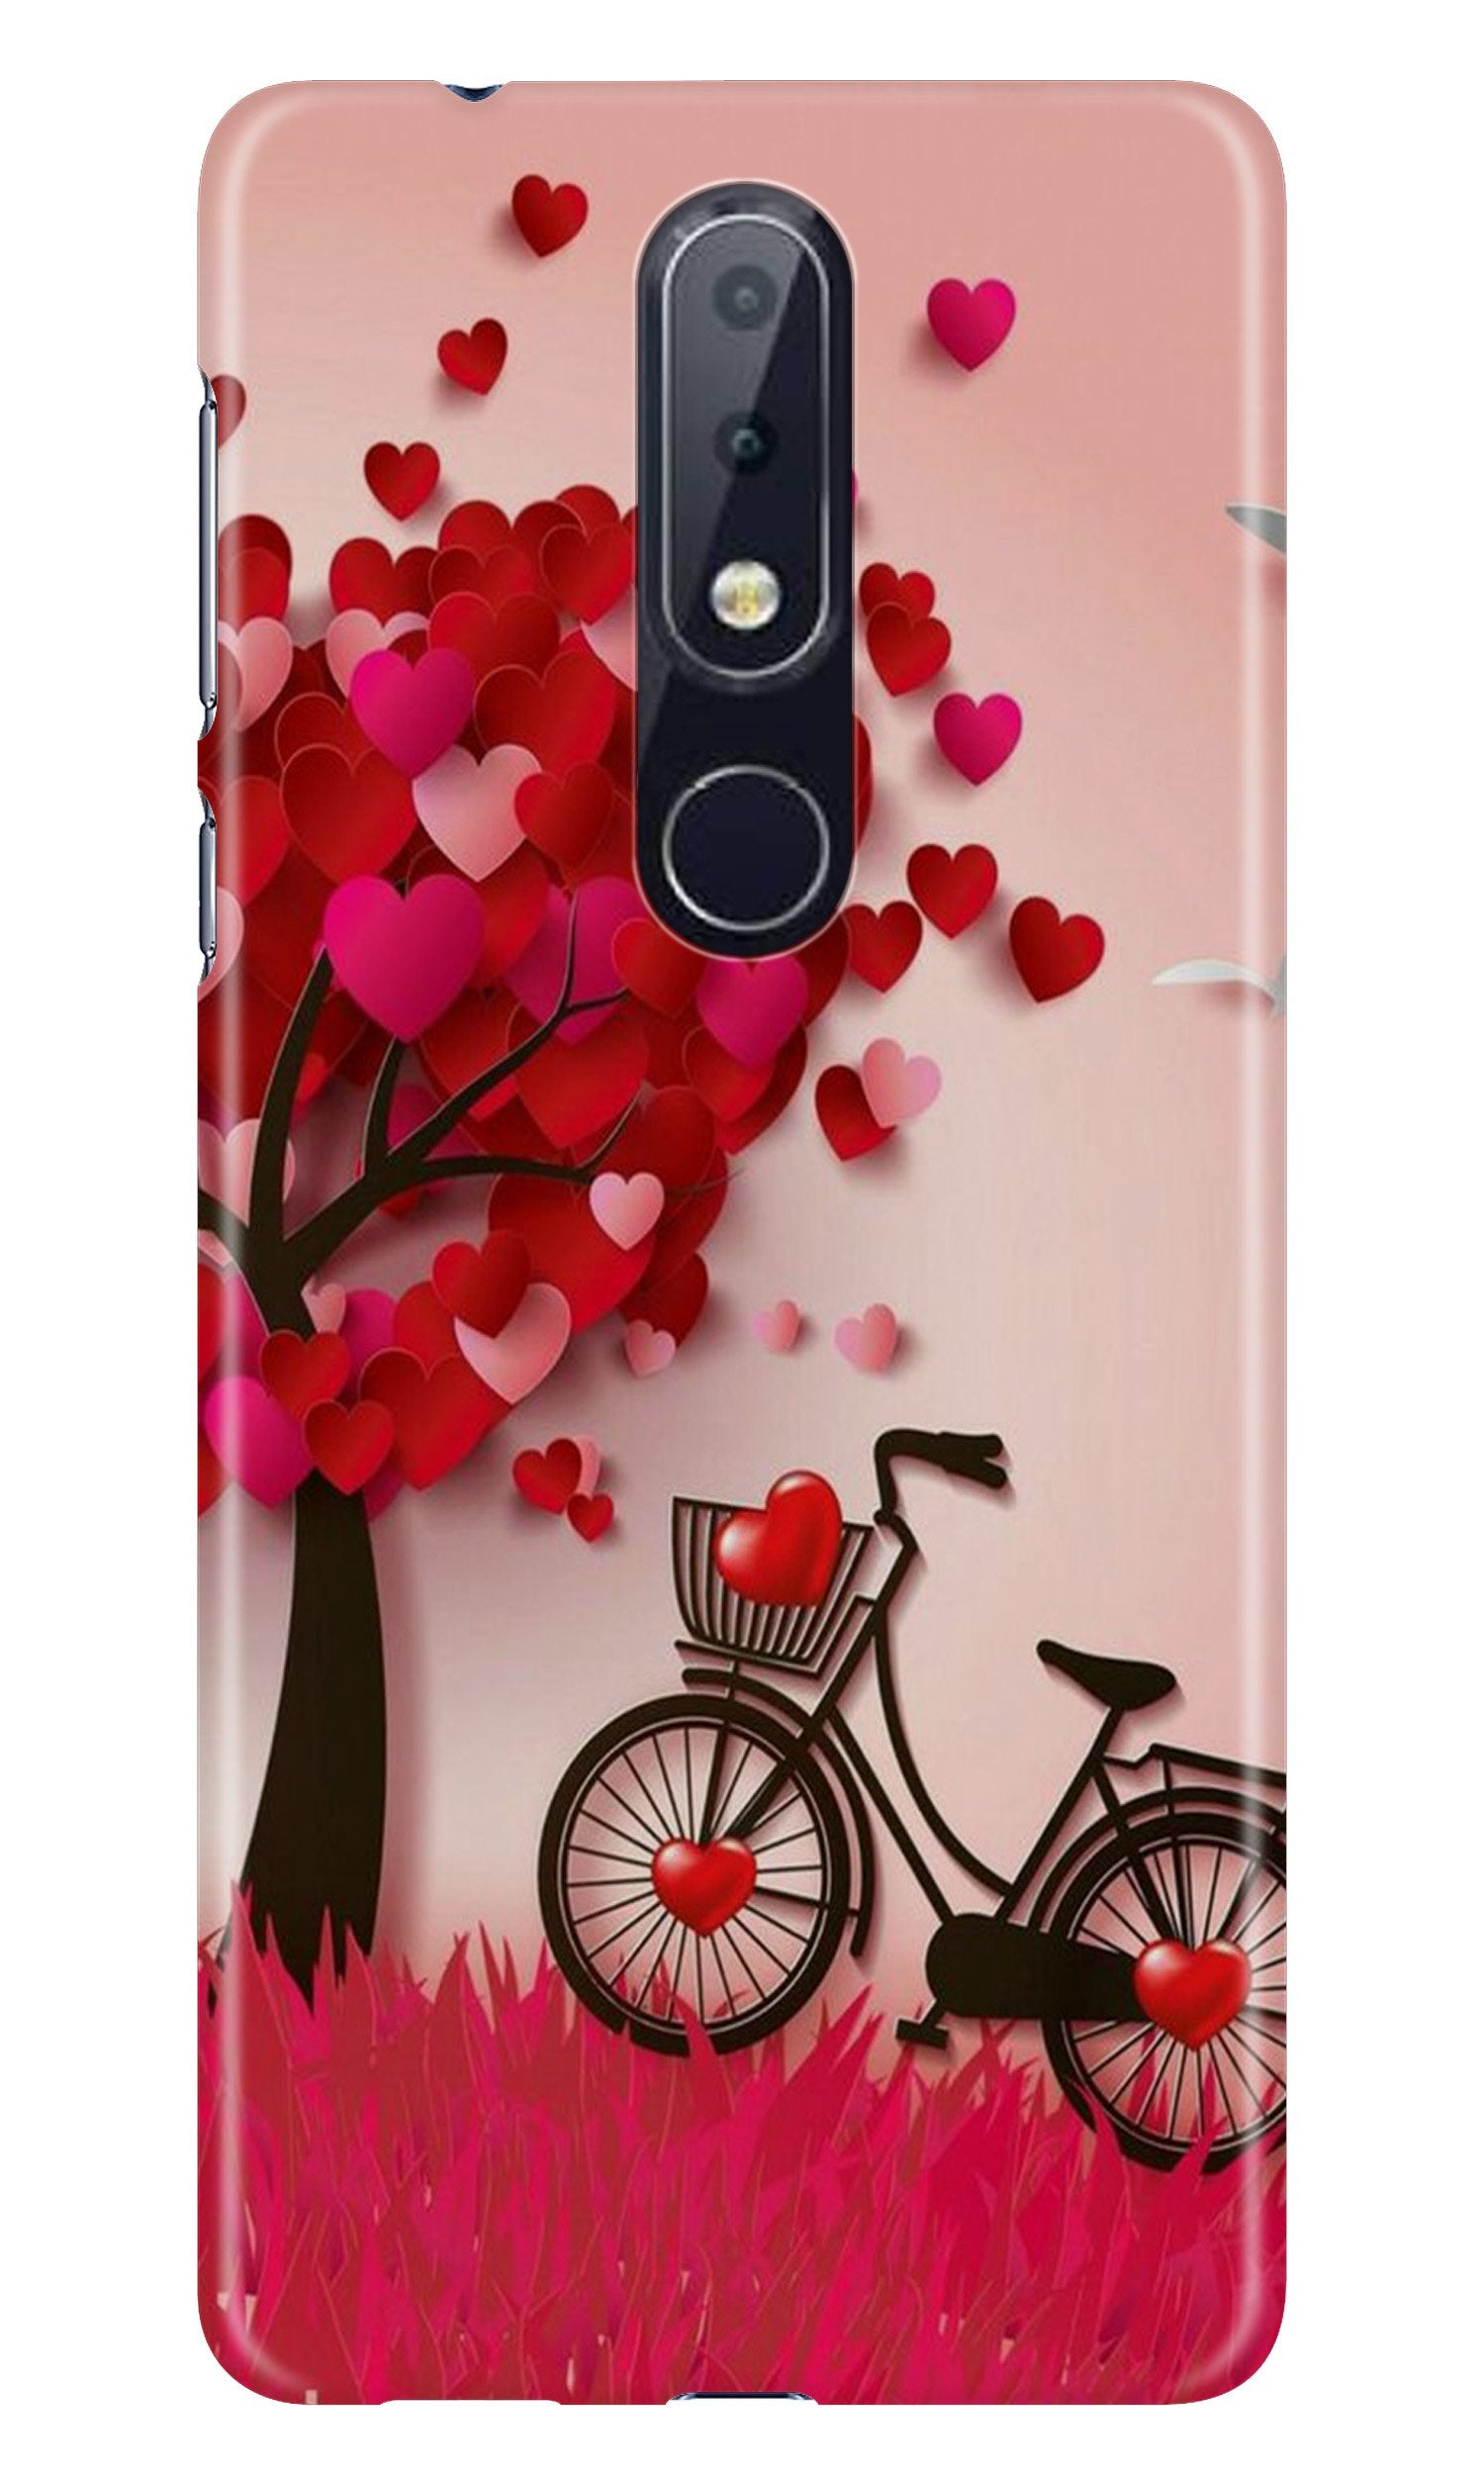 Red Heart Cycle Case for Nokia 7.1 (Design No. 222)